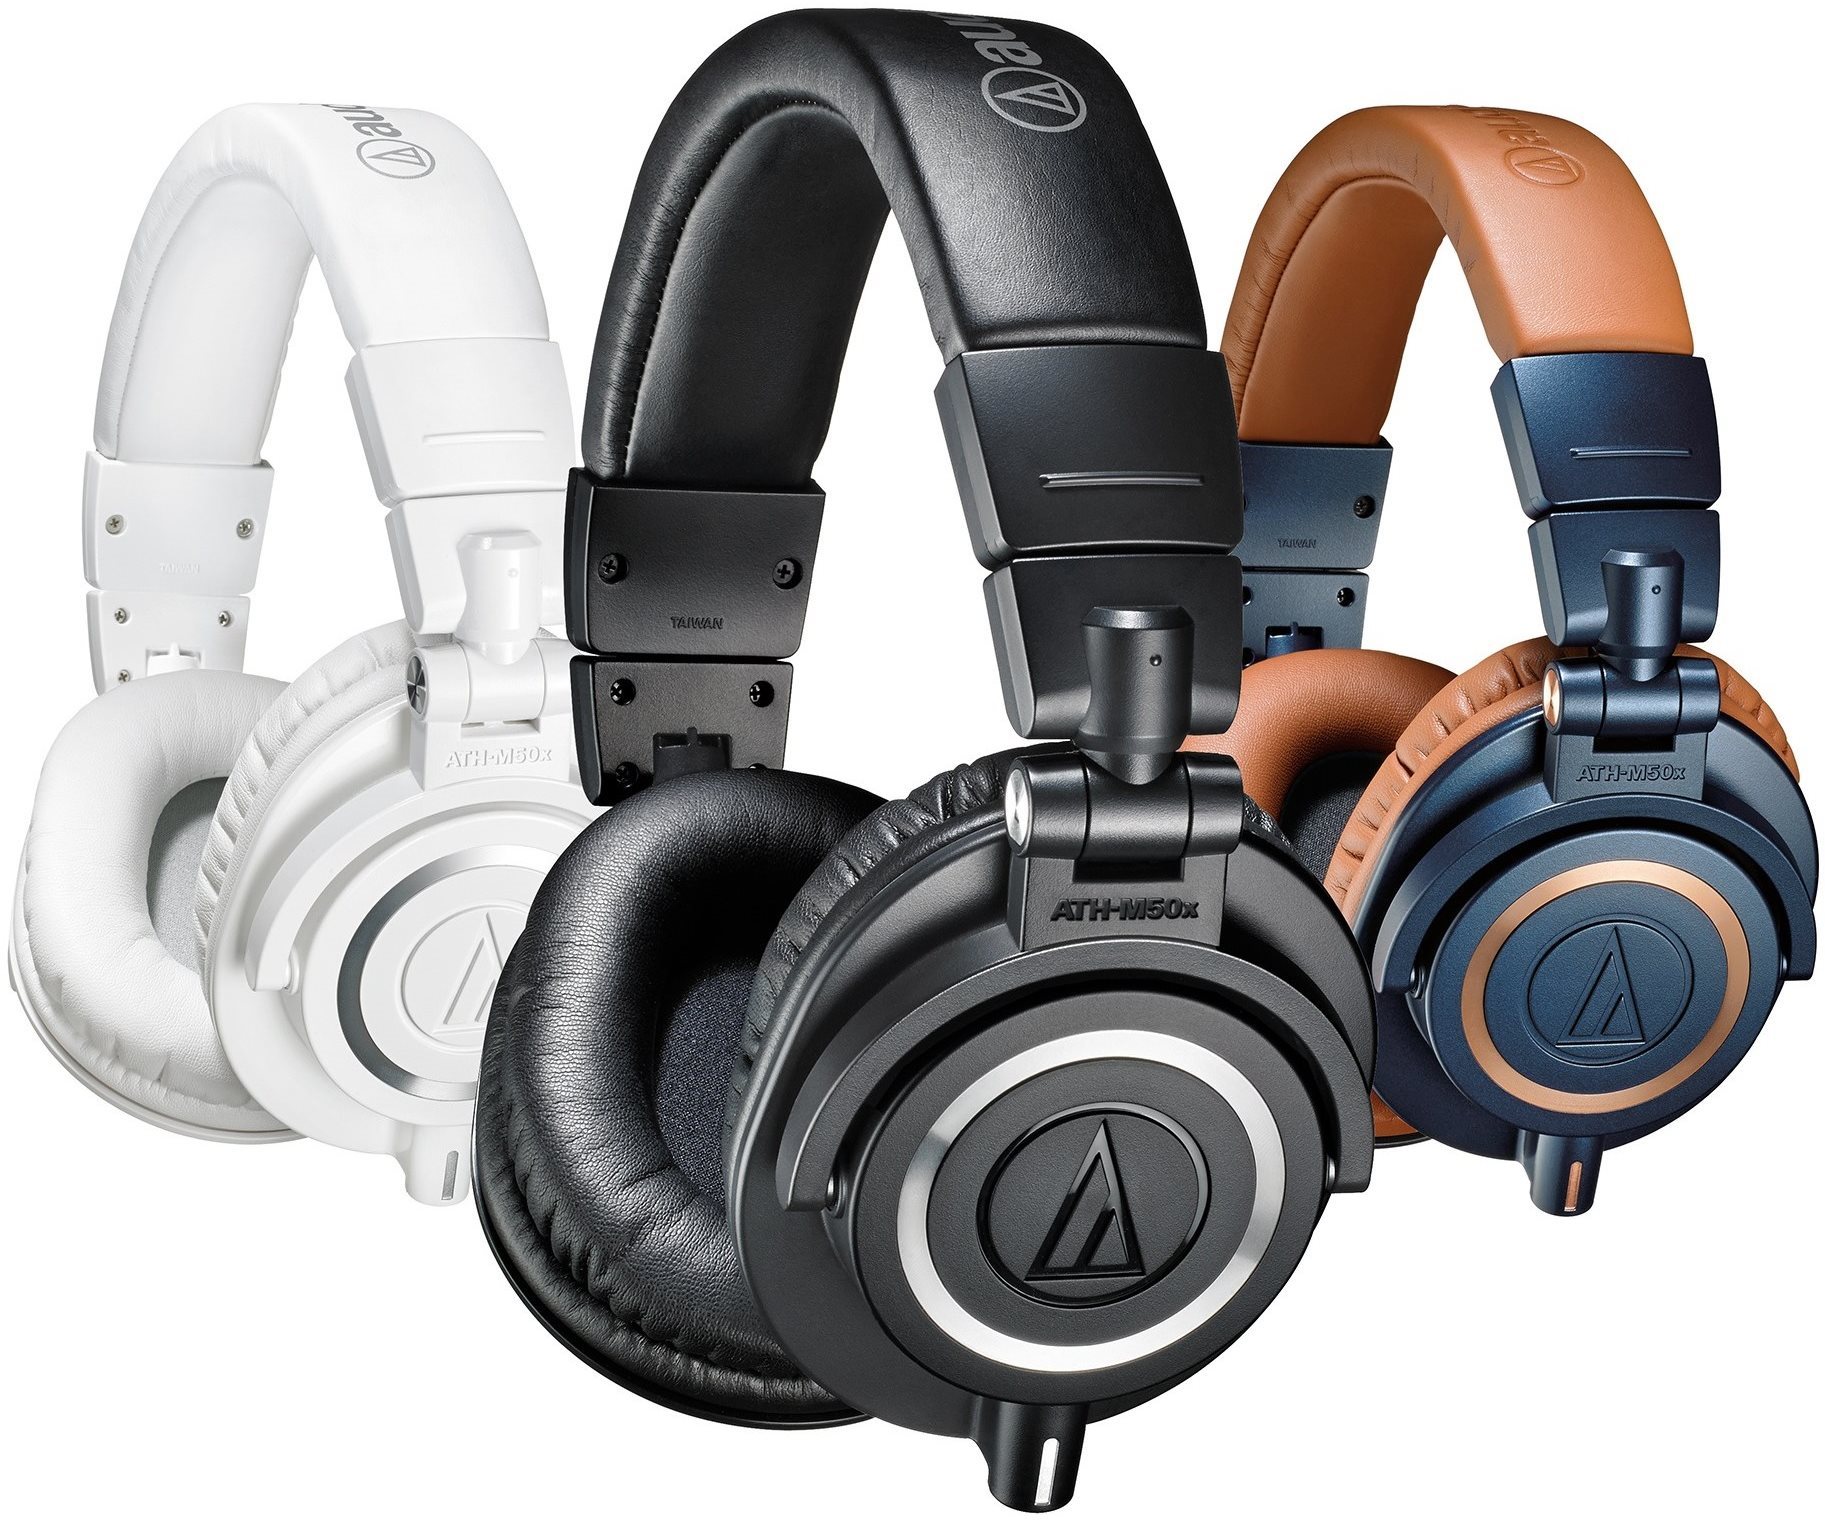 Headphones Audio-technica ATH-M50x Lateral view